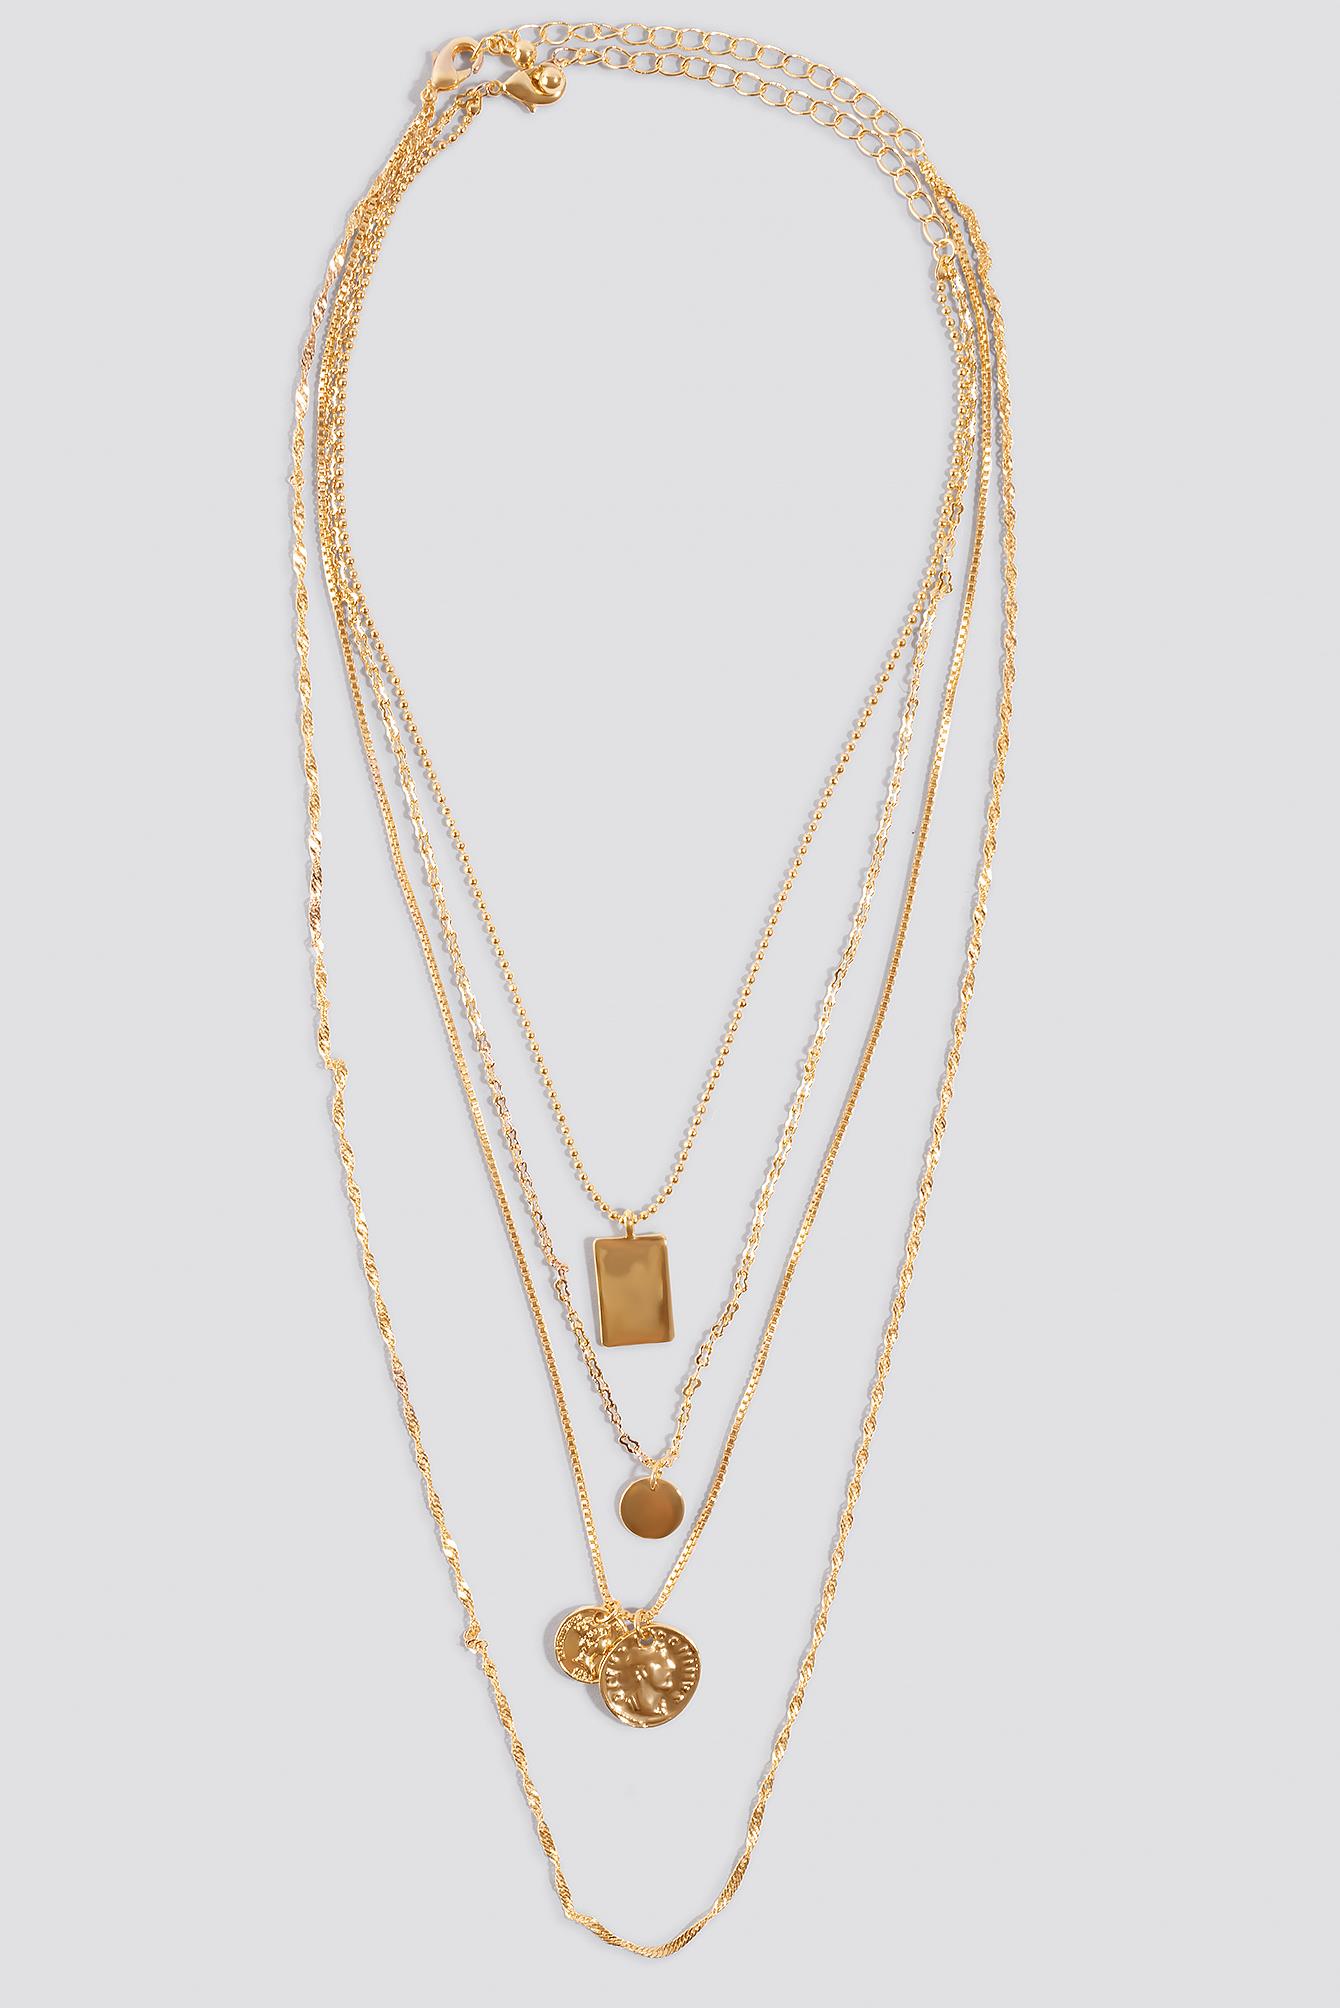 NA-KD Mixed Pendant Necklace Gold in Metallic - Lyst